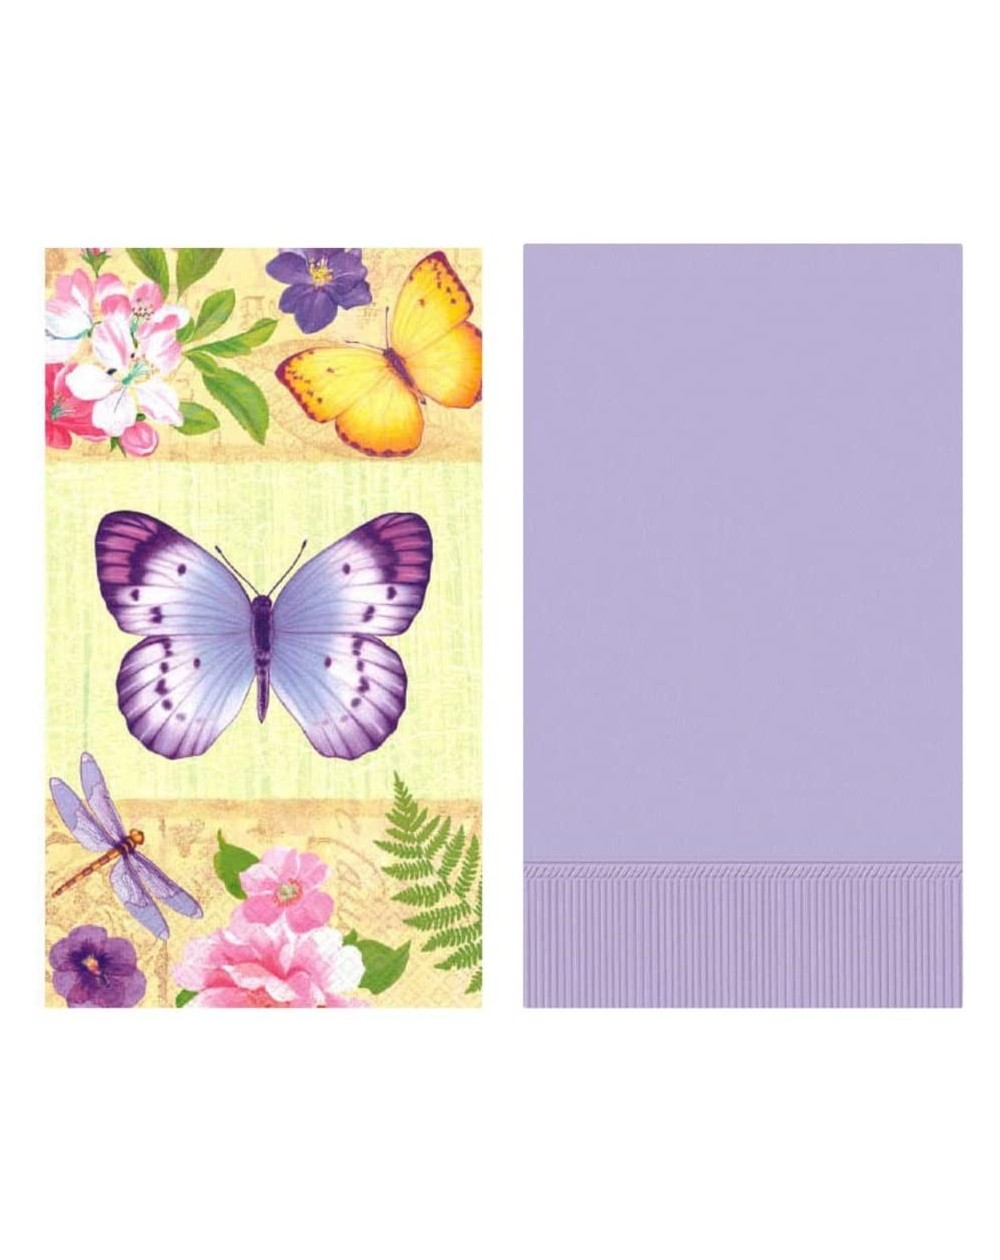 Tableware Everyday Bathroom Guest Towels- Disposable Paper Buffet Napkins- Set of 2 Packages of 16 (Lavender Garden) - Lavend...